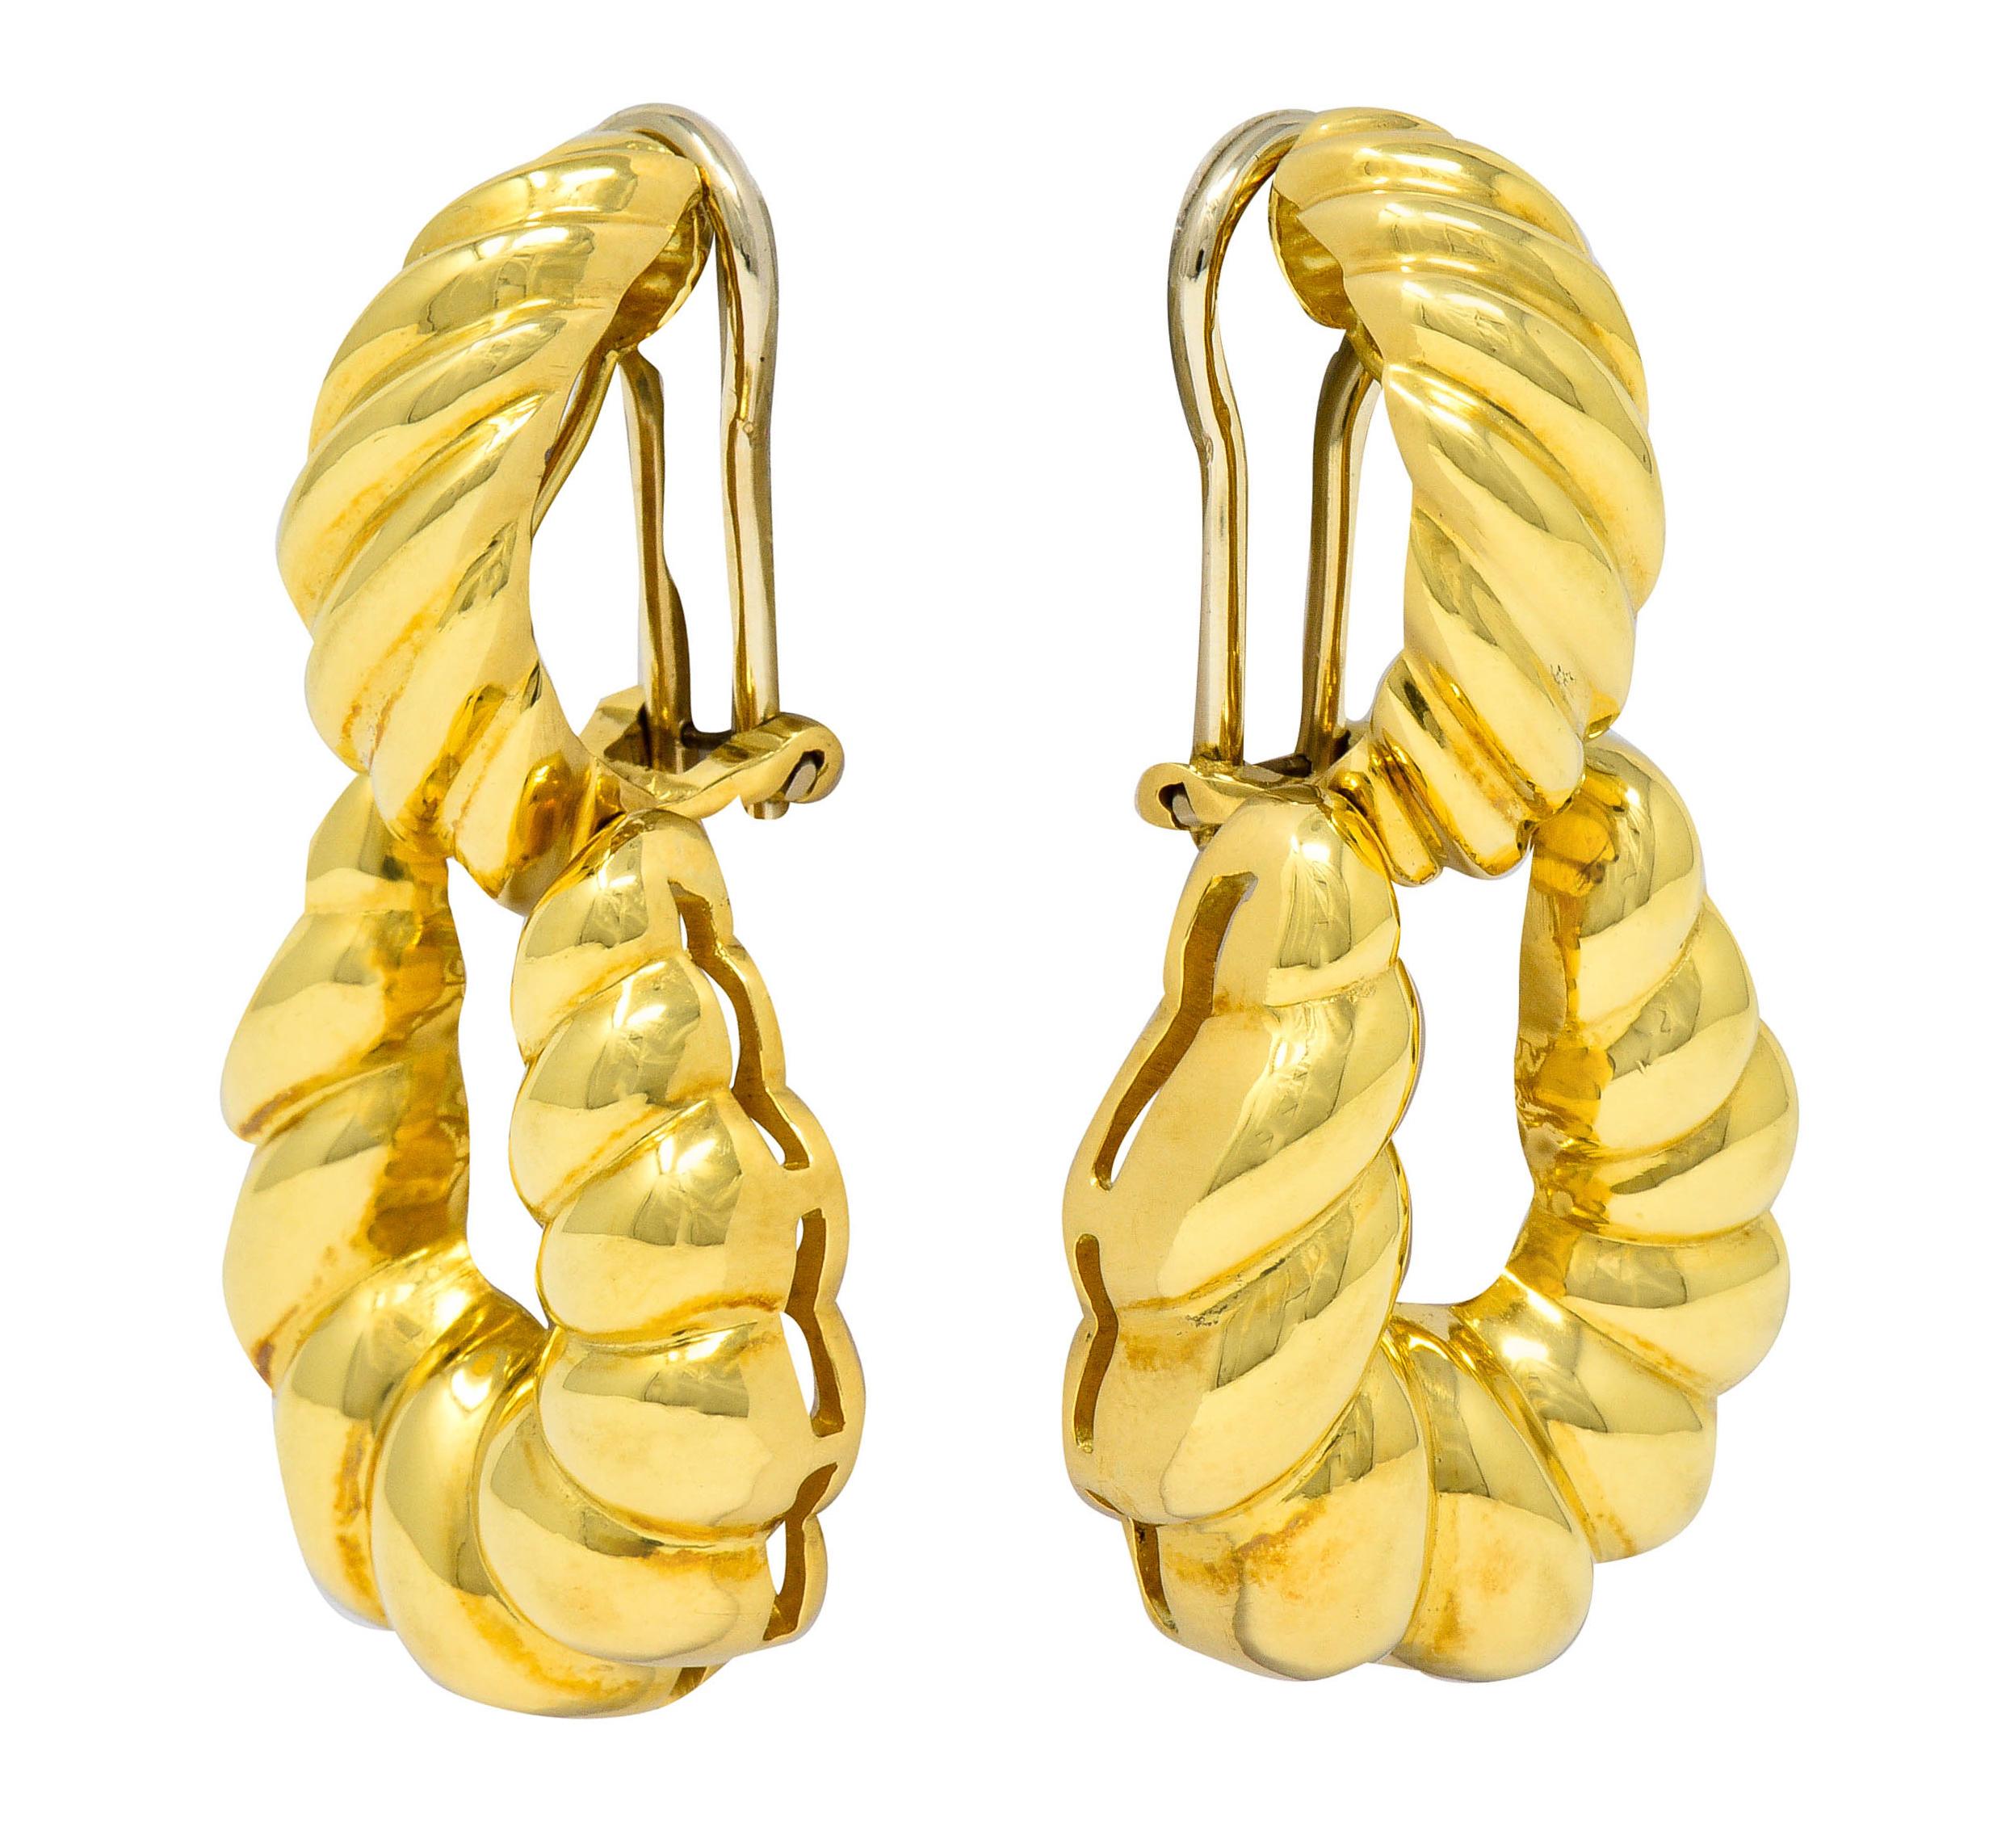 Doorknocker style earrings designed as a half hooped surmount suspending an articulated loop

Both surmount and loop are deeply ribbed and highly polished

Completed by hinged white gold omega backs

Signed T&Co. Italy

With Italian assay marks for